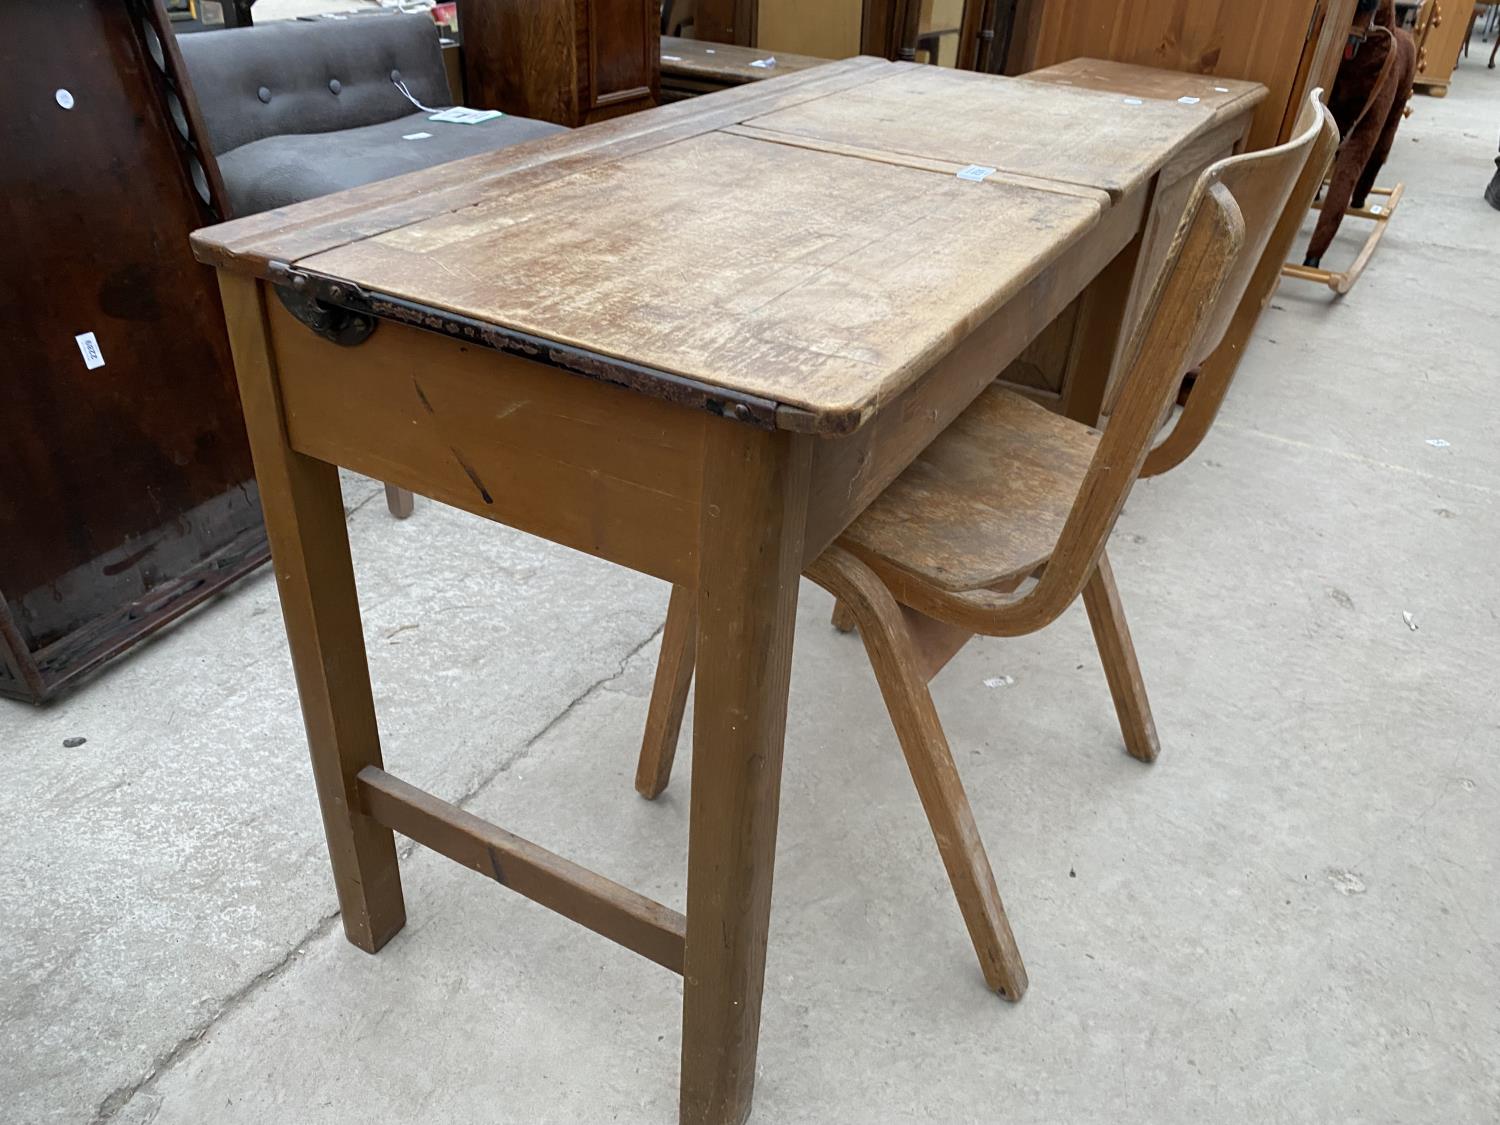 A MID 20TH CENTURY CHILDS DOUBLE DESK WITH BENTWOOD CHAIR - Image 2 of 3